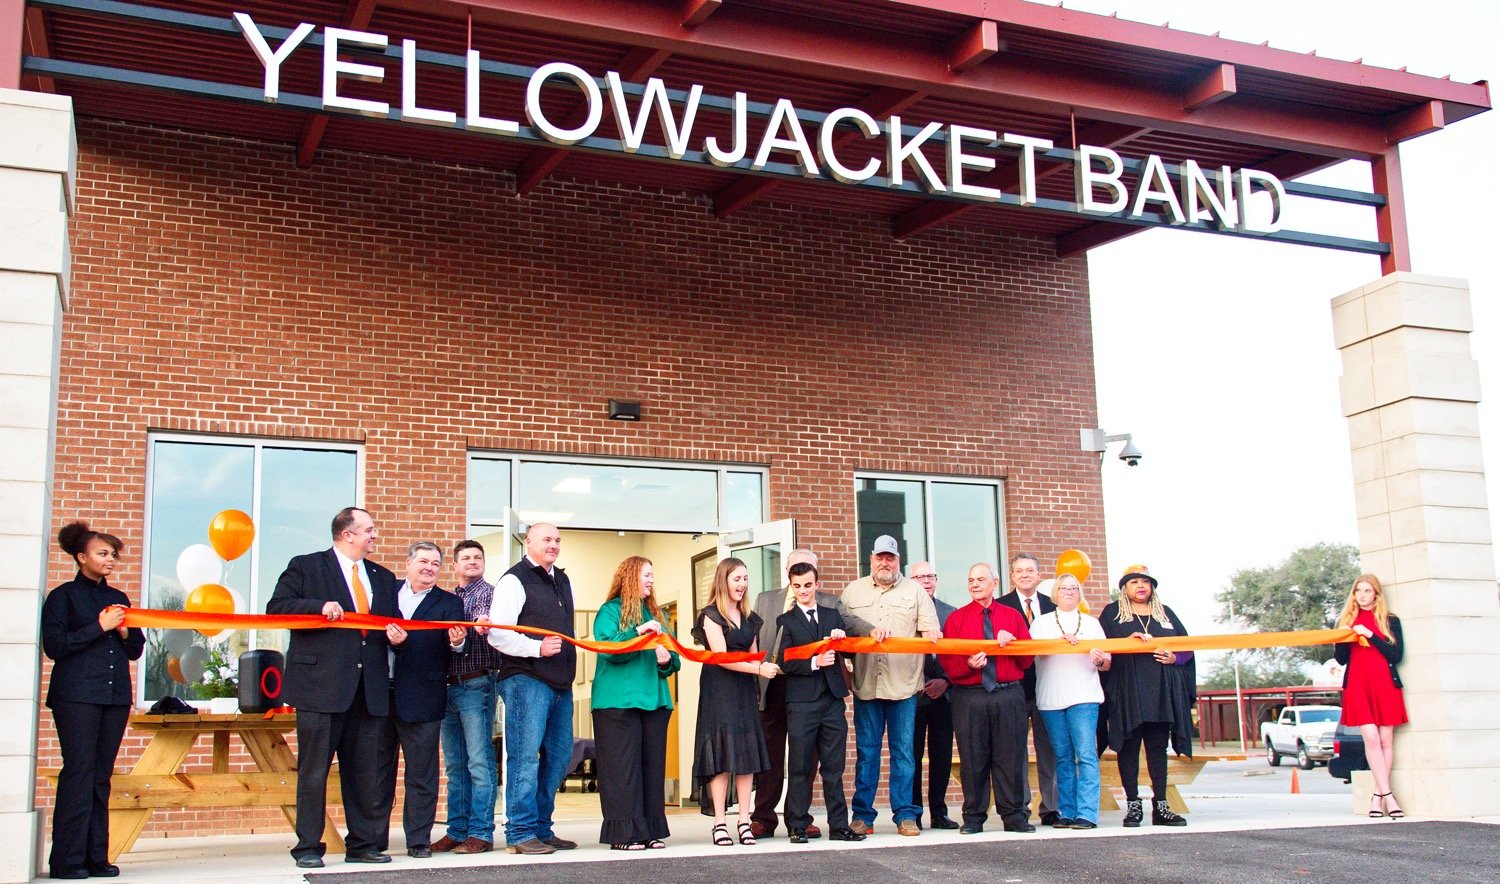 Taking part were, from left, Kaleece Palmer, Superintendent Cody Mize, architect Perry Thompson, construction manager Wes McClure with Sherrill Construction, school board members Jay McGough and Jill Quiambao, cutting the ribbon drum majors Maddie Tucker and Cameron Bussell (in front of board member Glen Dossett), board member Robbie Ballard, business manager William Bjork, board president John Abbott, high school Principal Mike Sorenson, Mayor Jayne Lankford, council member Cassandra Sampson and Tori Kinder. [see more of the celebration]